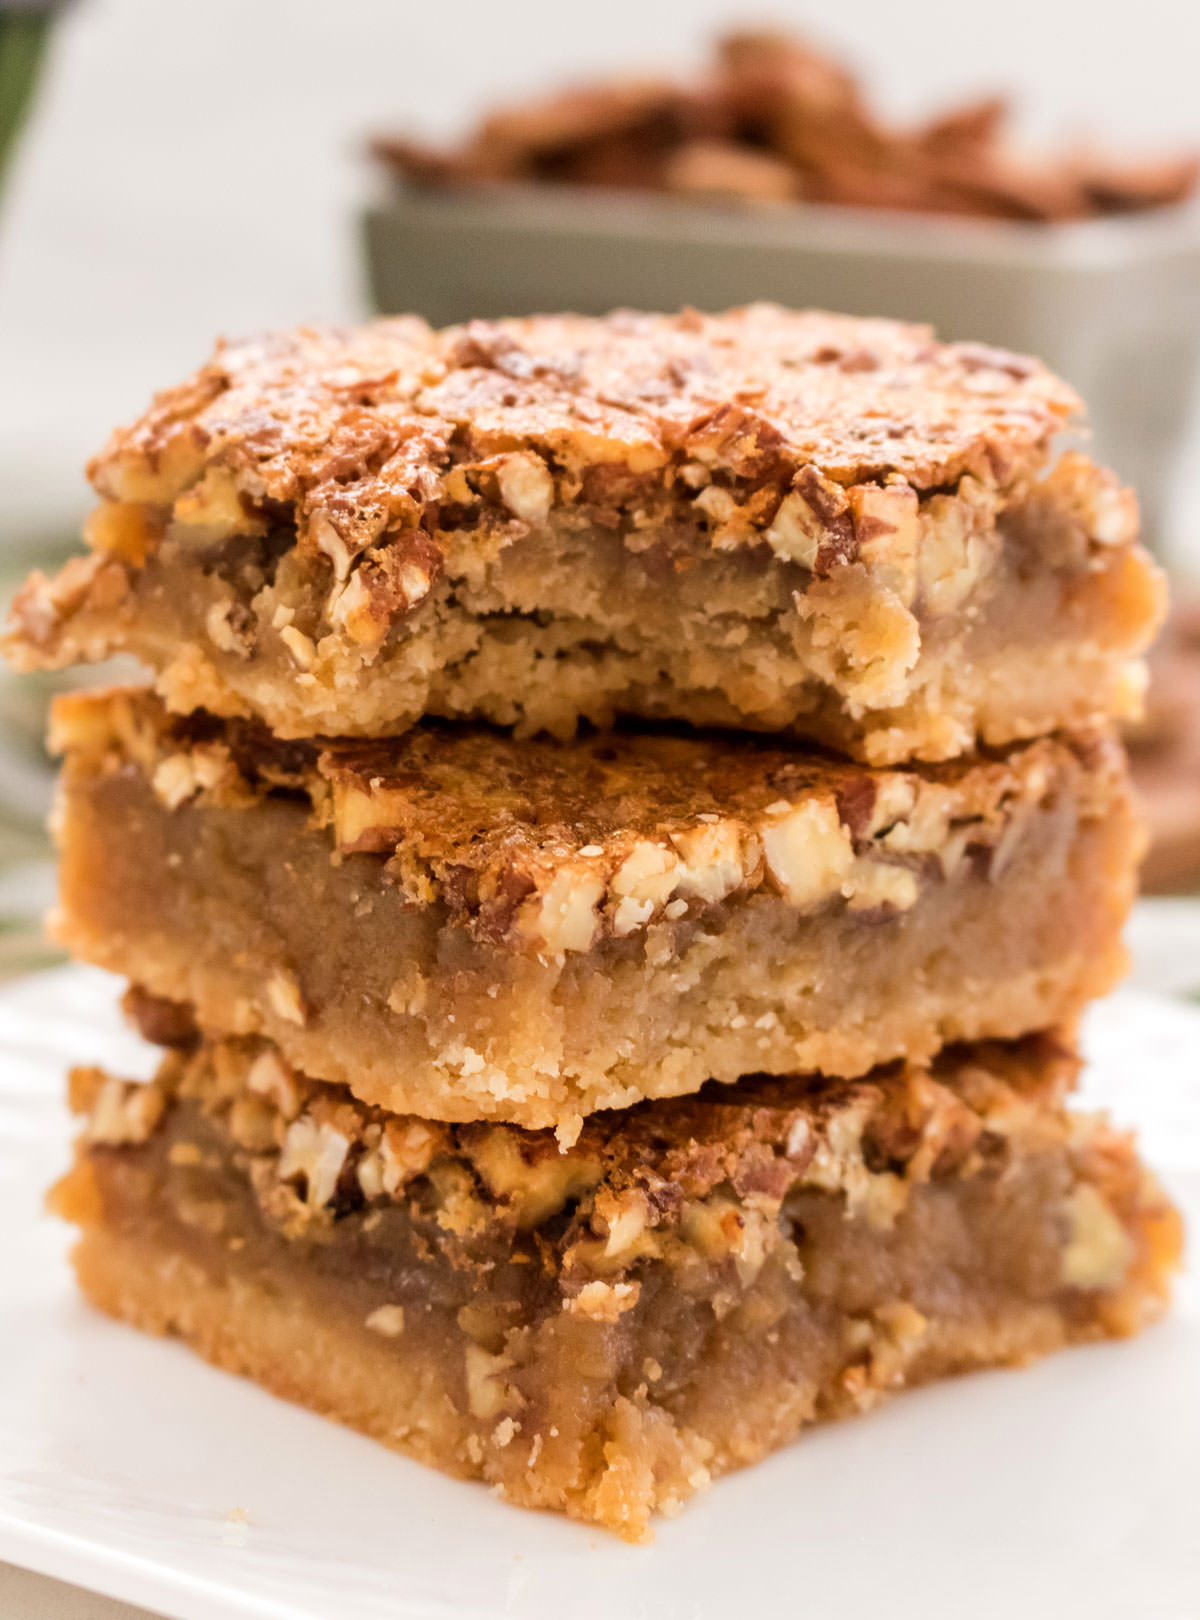 Closeup on a stack of three Pecan Pie Bars sitting on a white plate, the top one has a bite taken out of it.